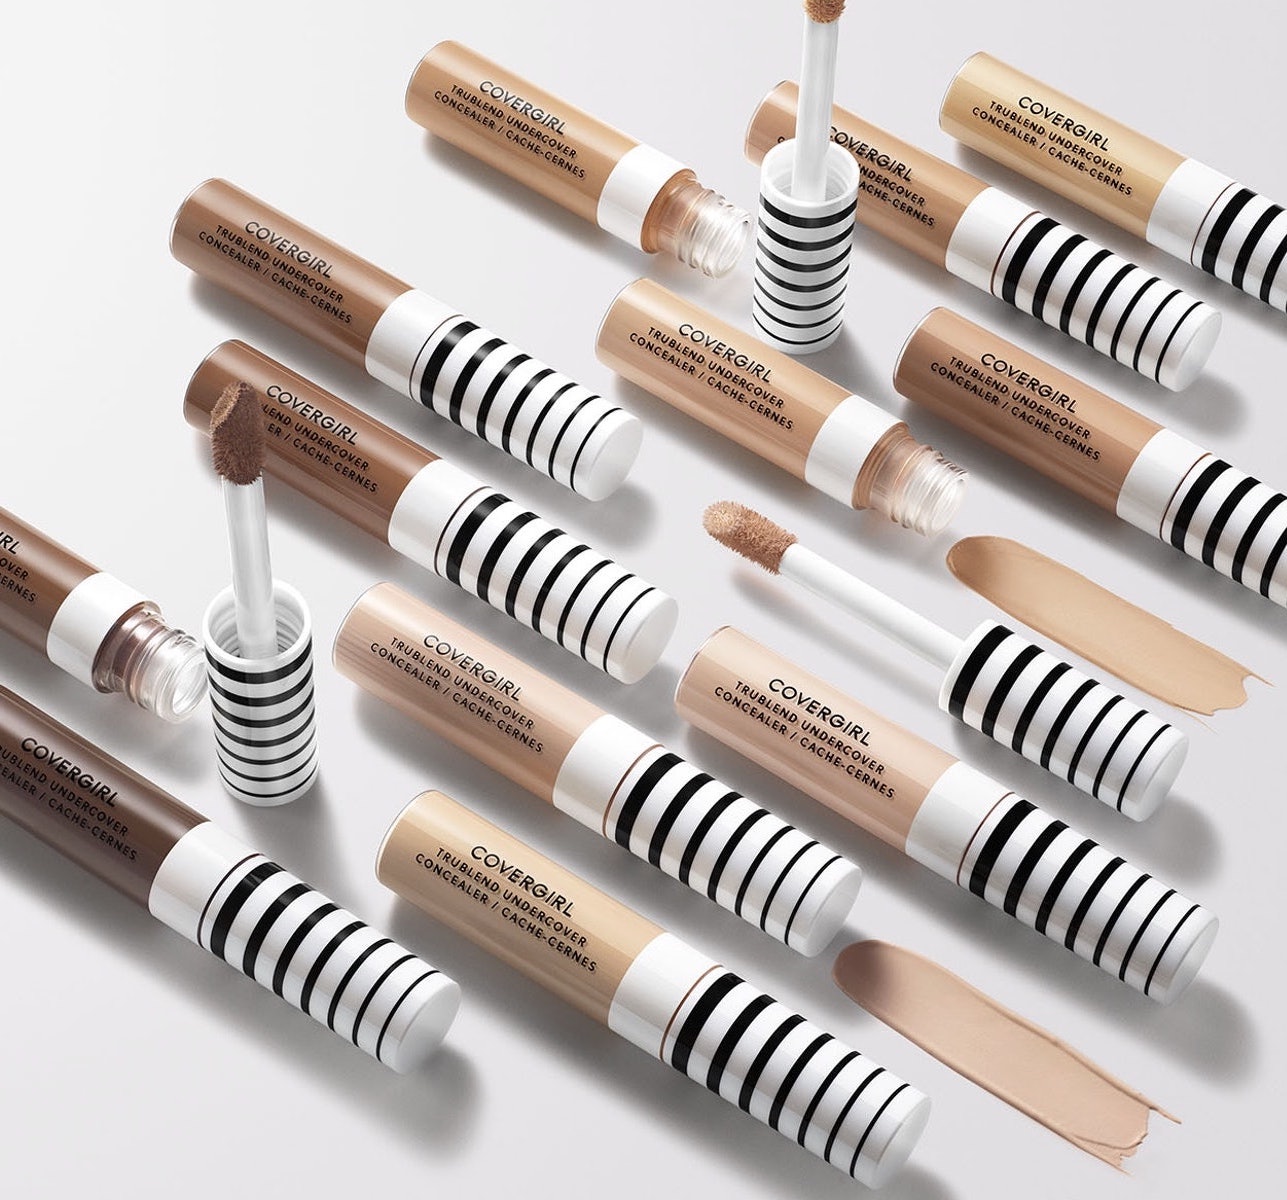 Covergirl TruBlend Undercover Concealer shades